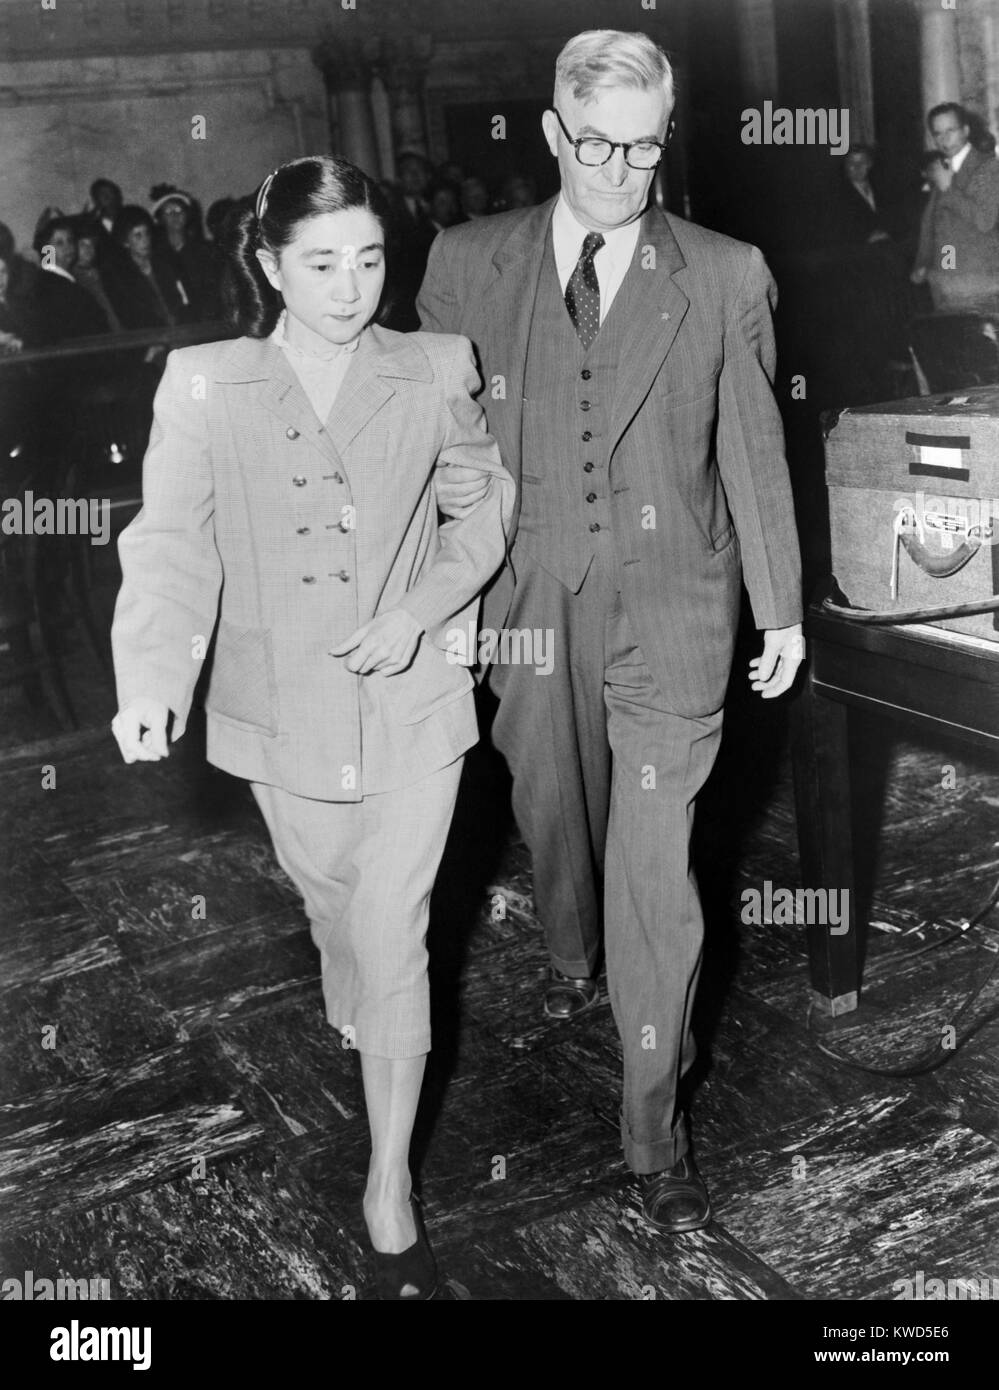 Iva Toguri D'Aquino led from Federal Court in San Francisco by a U.S. Marshall. Based on perjured testimony, the former 'Tokyo Rose' was sentenced to ten years in prison and fined $10,000 in 1949. She served six years in prison, but was later pardoned by President Gerald Ford. (BSLOC 2014 13 11) Stock Photo